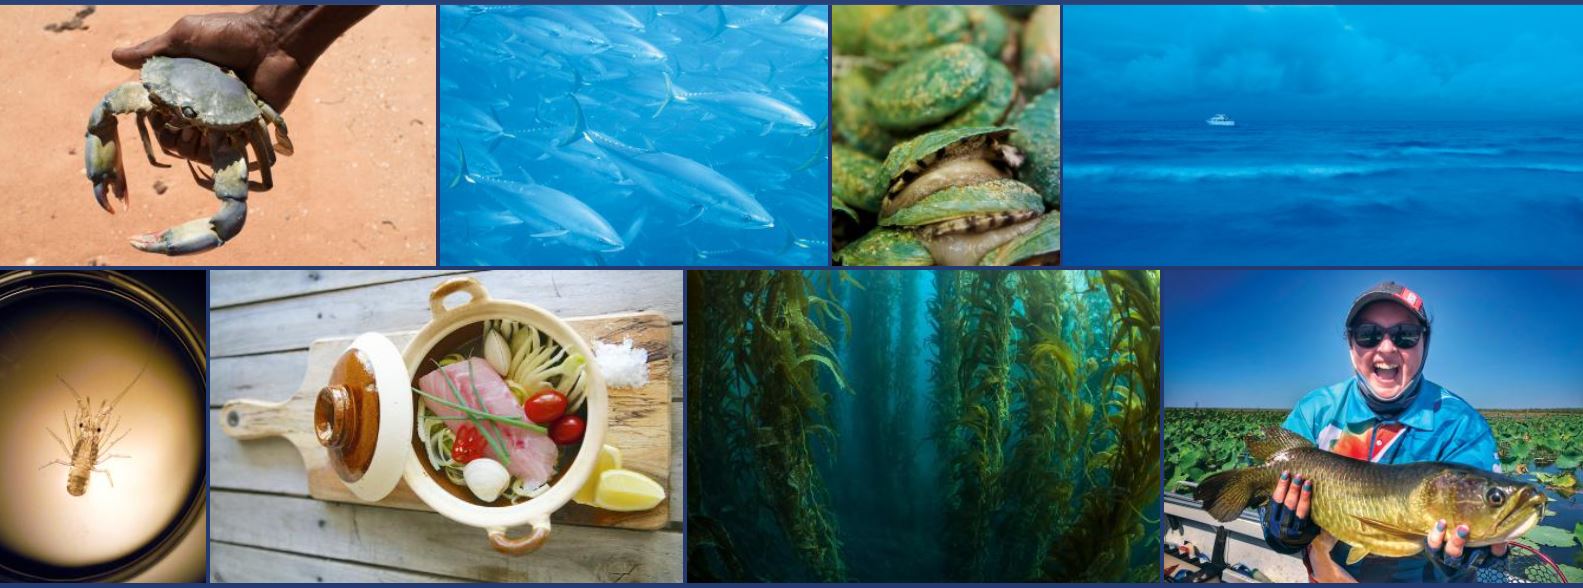 Collage of seafood related images